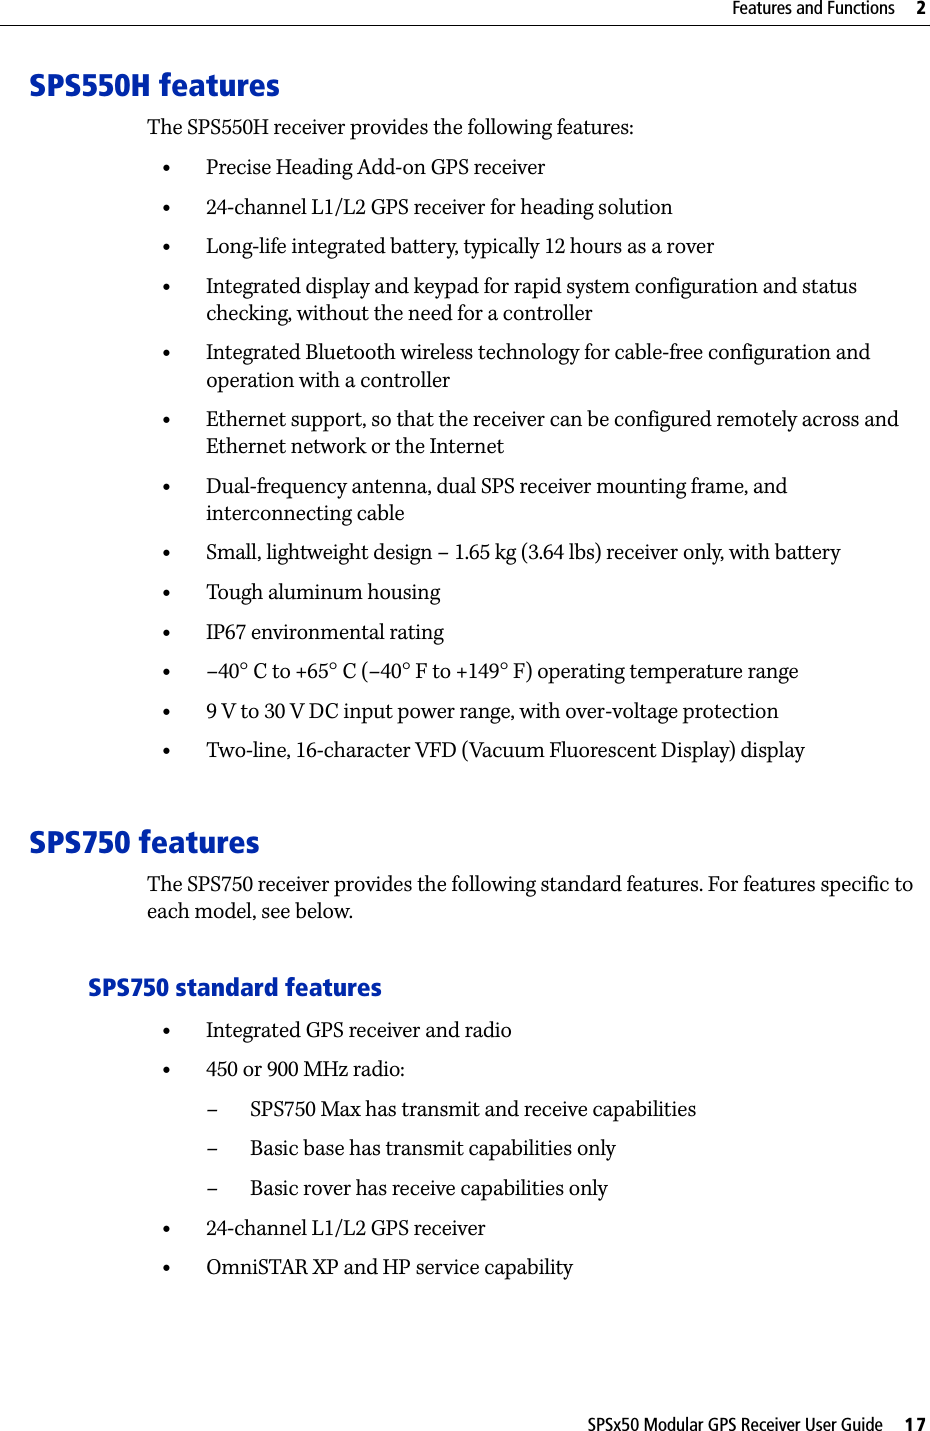 SPSx50 Modular GPS Receiver User Guide     17Features and Functions     2SPS550H featuresThe SPS550H receiver provides the following features:•Precise Heading Add-on GPS receiver•24-channel L1/L2 GPS receiver for heading solution•Long-life integrated battery, typically 12 hours as a rover•Integrated display and keypad for rapid system configuration and status checking, without the need for a controller •Integrated Bluetooth wireless technology for cable-free configuration and operation with a controller•Ethernet support, so that the receiver can be configured remotely across and Ethernet network or the Internet•Dual-frequency antenna, dual SPS receiver mounting frame, and interconnecting cable•Small, lightweight design – 1.65 kg (3.64 lbs) receiver only, with battery•Tough aluminum housing•IP67 environmental rating•–40°C to +65°C (–40°F to +149°F) operating temperature range•9 V to 30 V DC input power range, with over-voltage protection•Two-line, 16-character VFD (Vacuum Fluorescent Display) displaySPS750 featuresThe SPS750 receiver provides the following standard features. For features specific to each model, see below.SPS750 standard features•Integrated GPS receiver and radio•450 or 900 MHz radio:– SPS750 Max has transmit and receive capabilities– Basic base has transmit capabilities only–Basic rover has receive capabilities only•24-channel L1/L2 GPS receiver•OmniSTAR XP and HP service capability